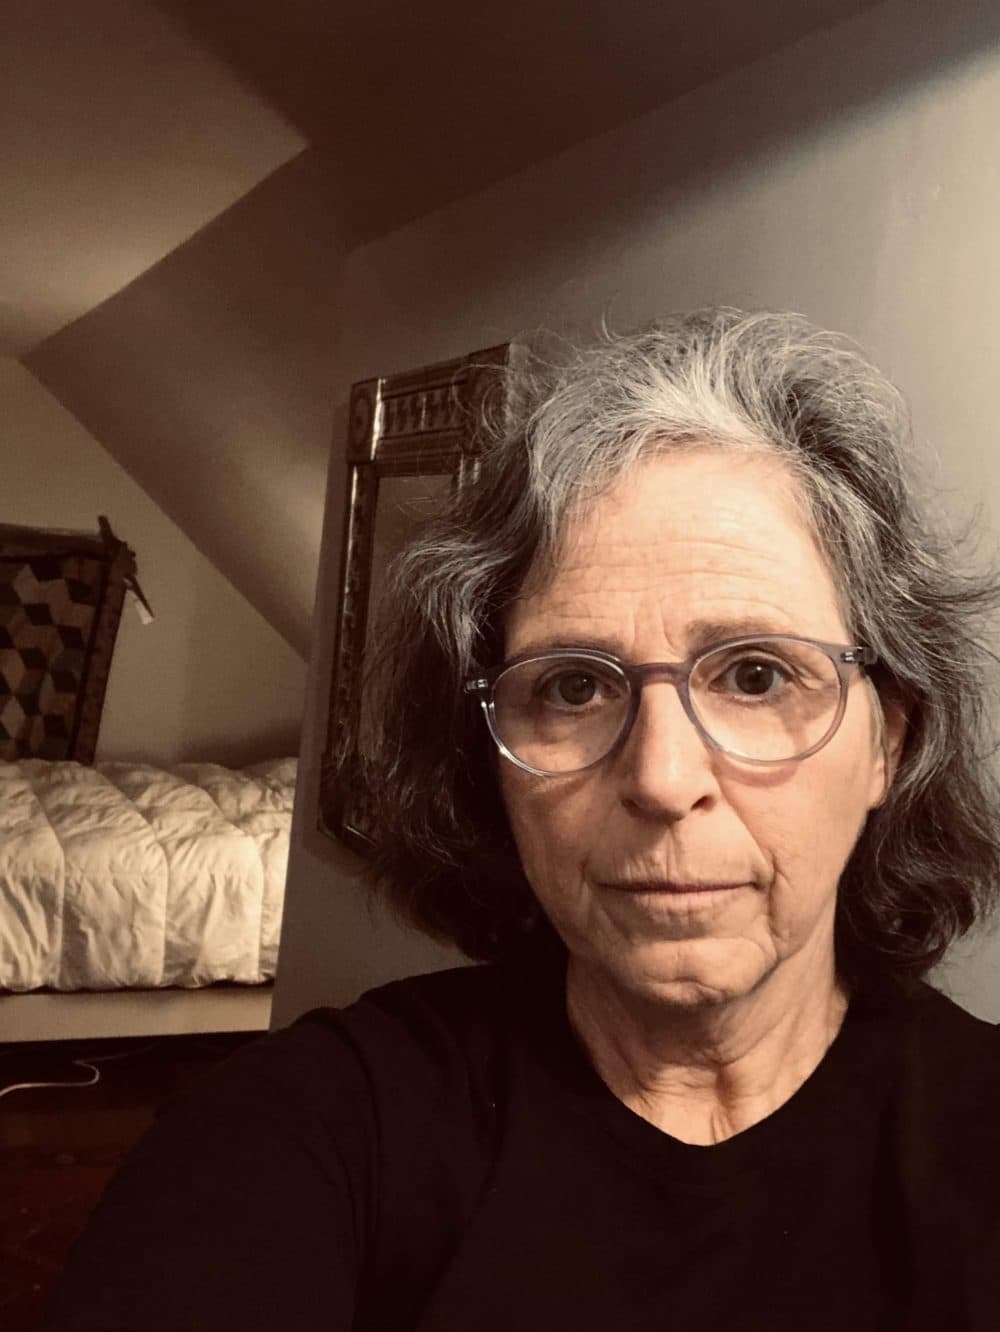 Dr. Elizabeth Mitchell, an emergency room physician, sleeps and spends time in an attic bedroom to minimize contact with her family in Boston. (Courtesy Elizabeth Mitchell)